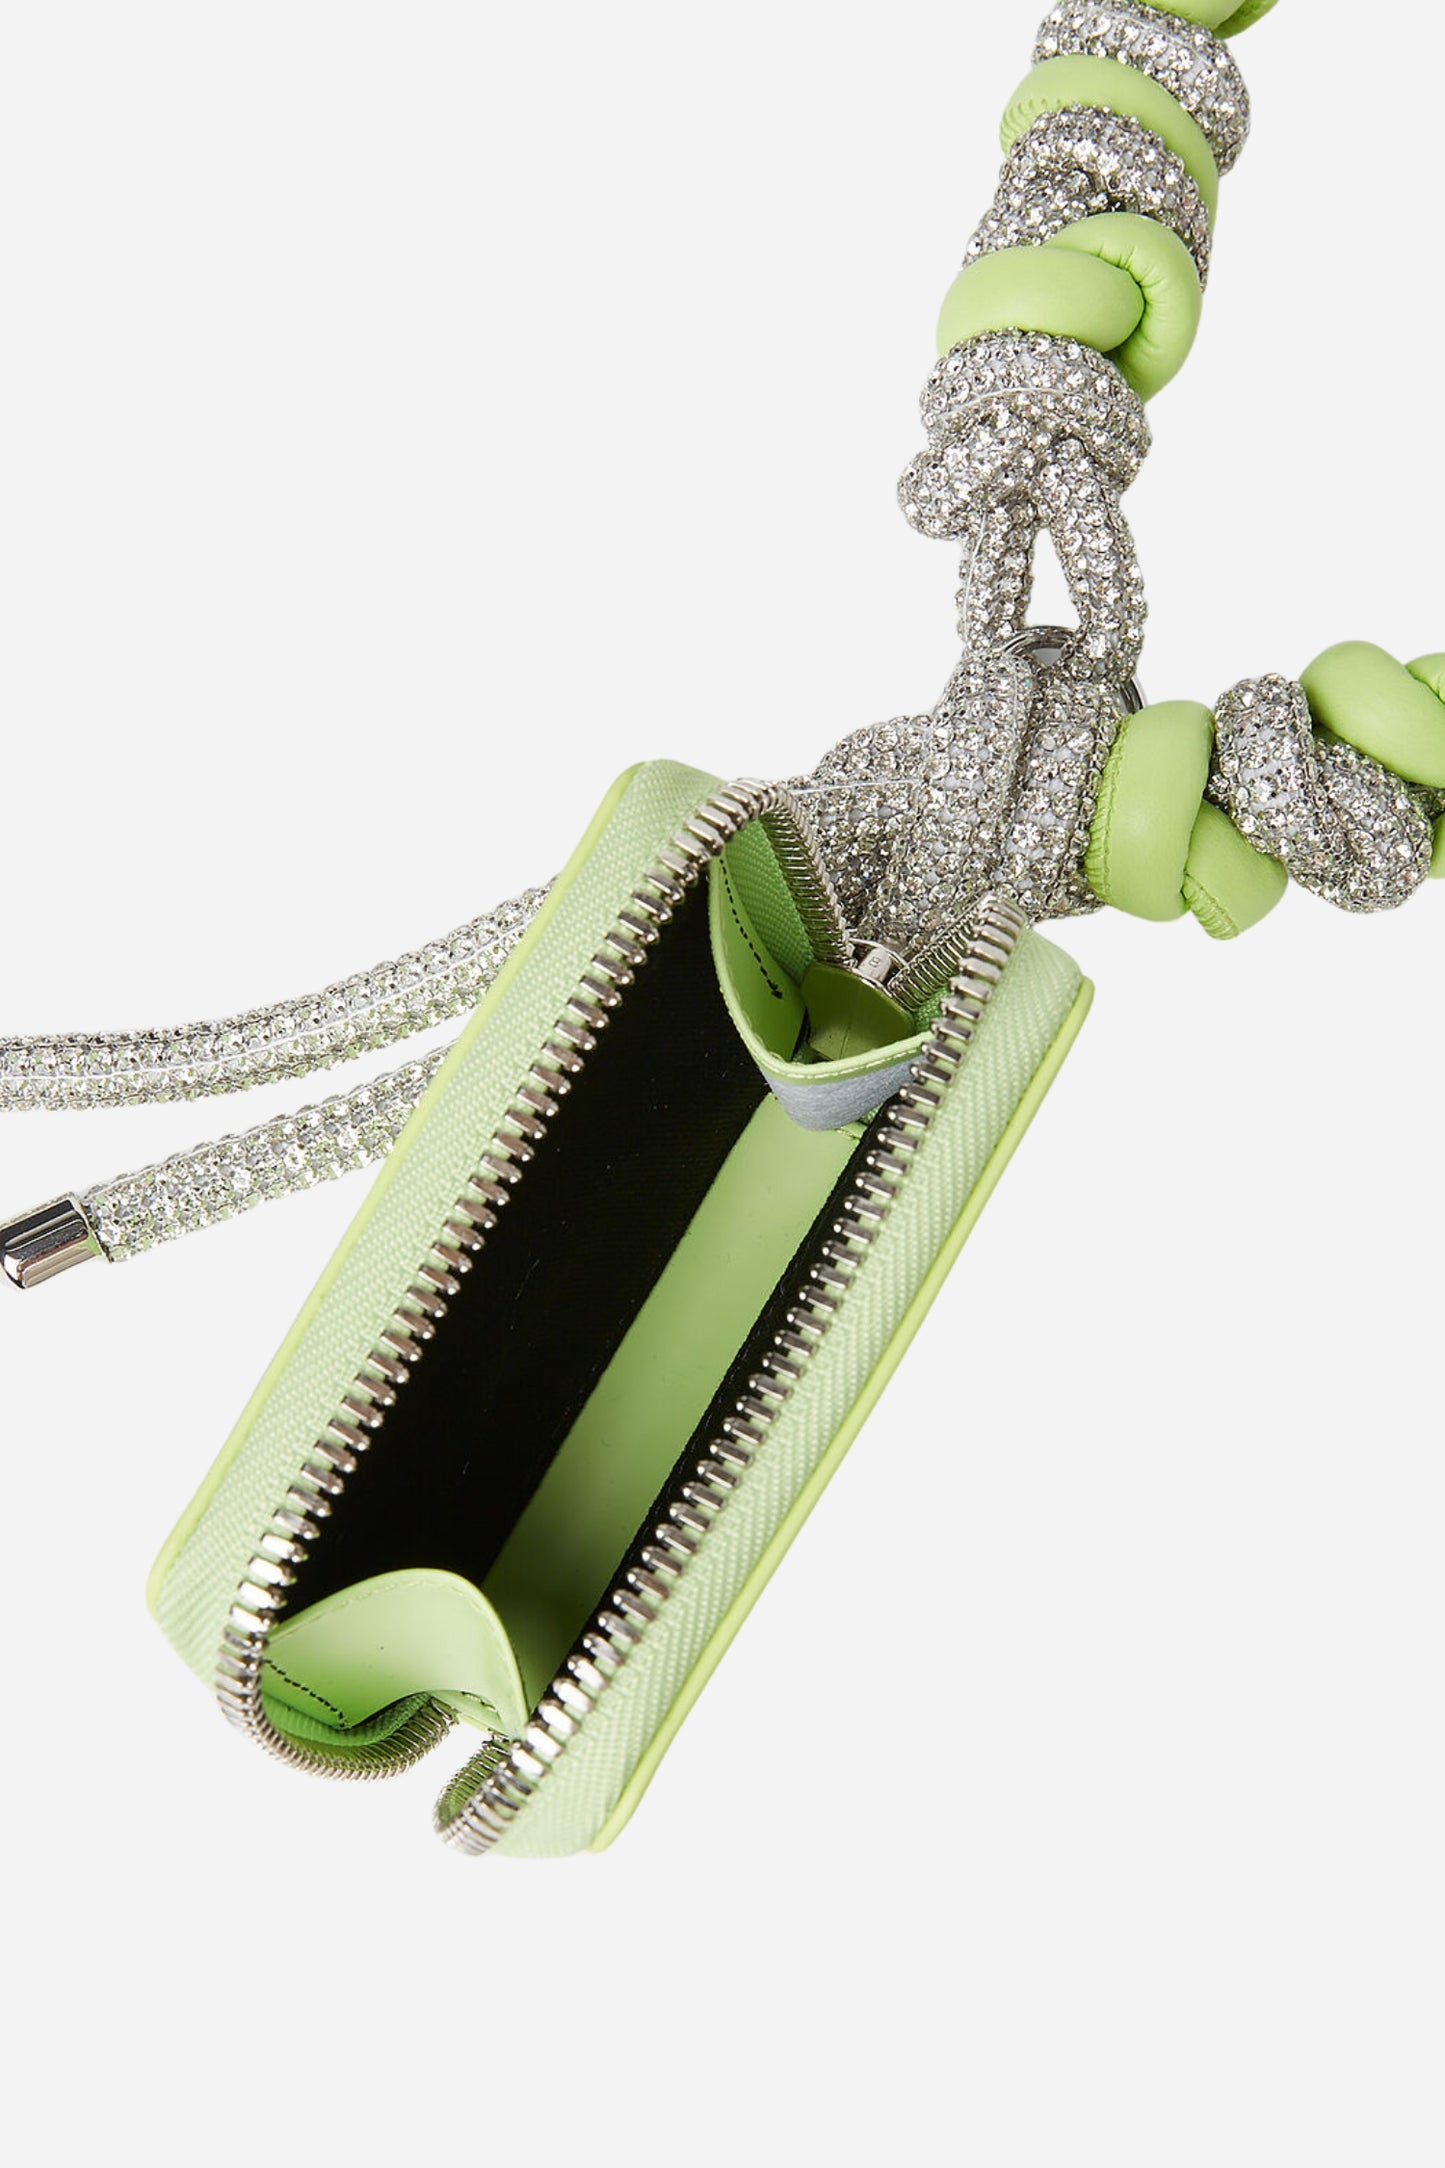 Phone Cord Chain Wallet